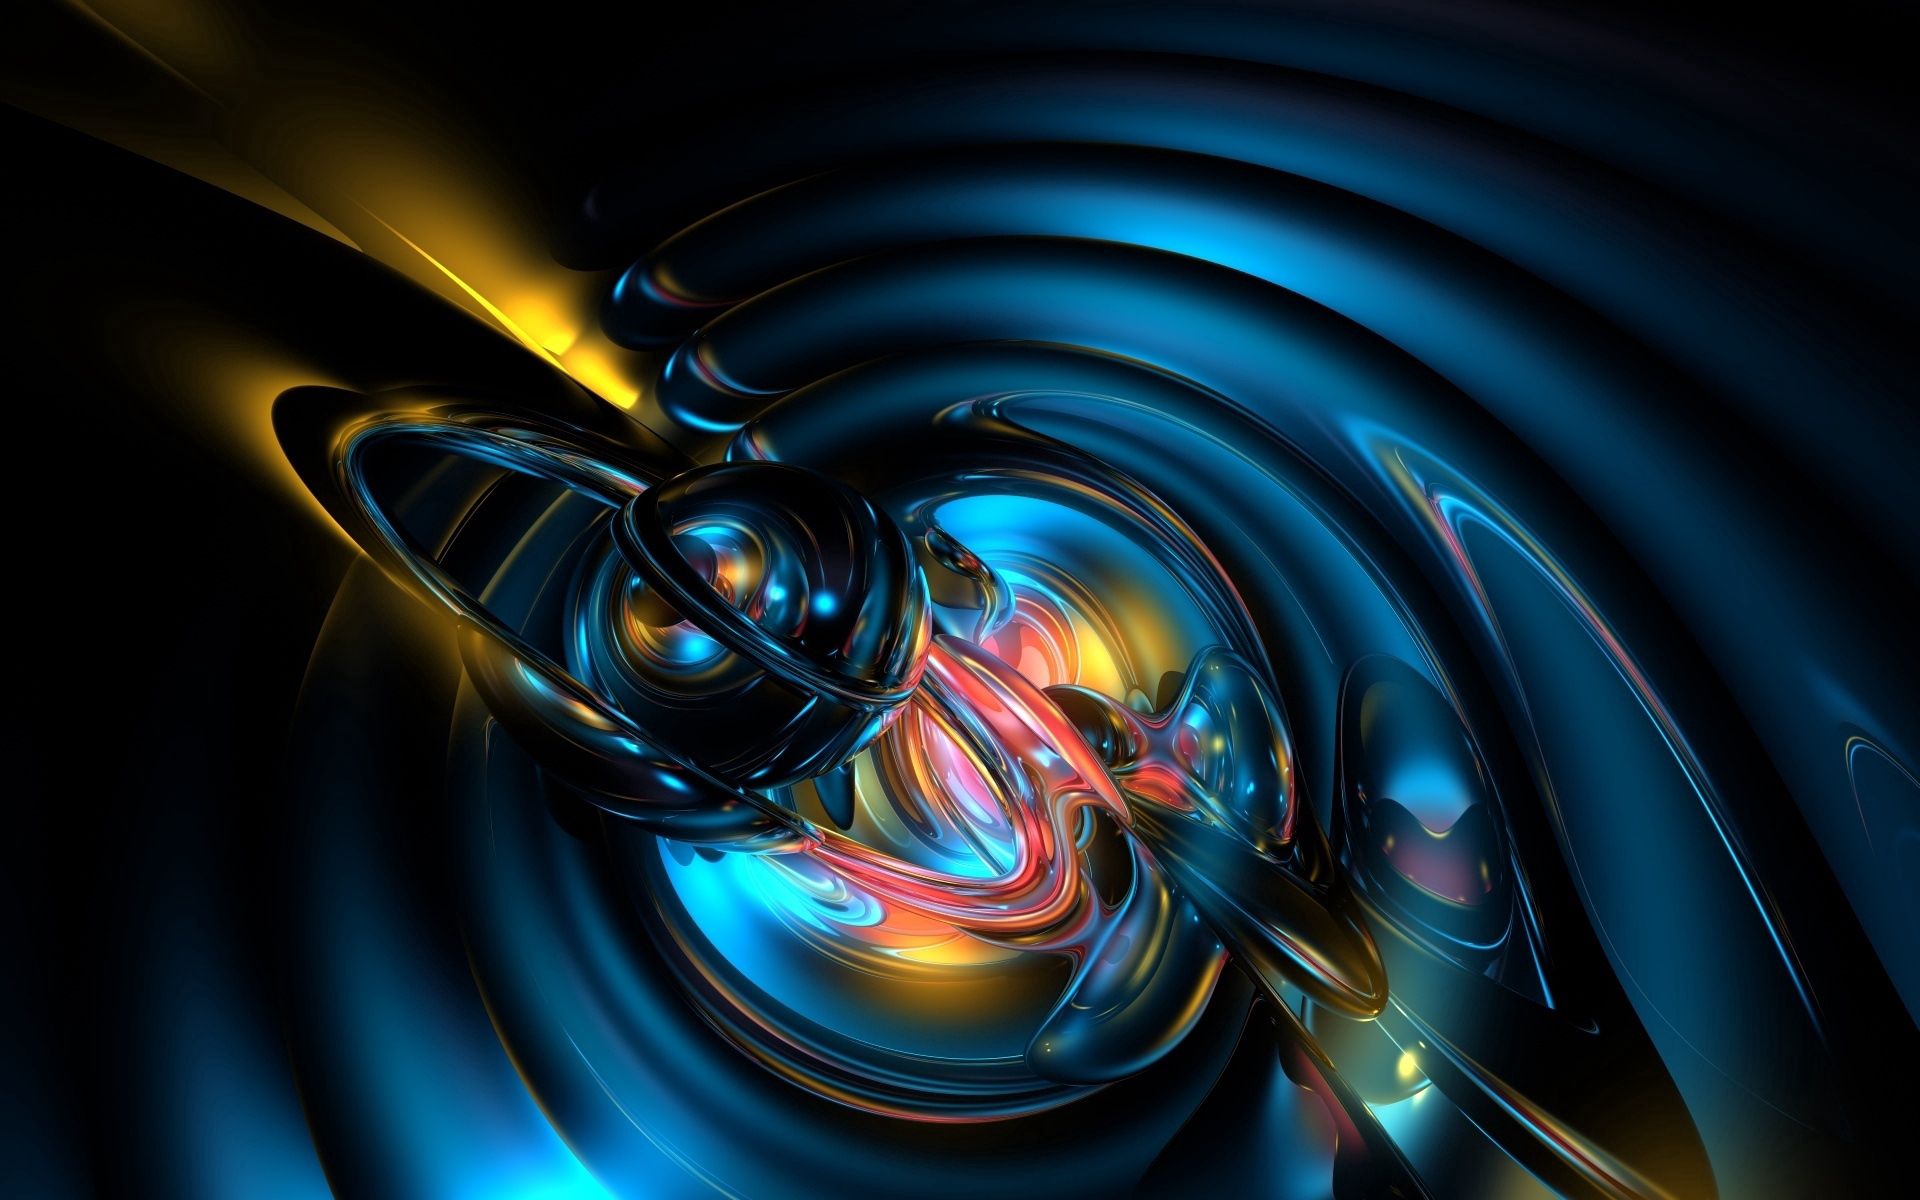 Abstract Tube Wallpapers